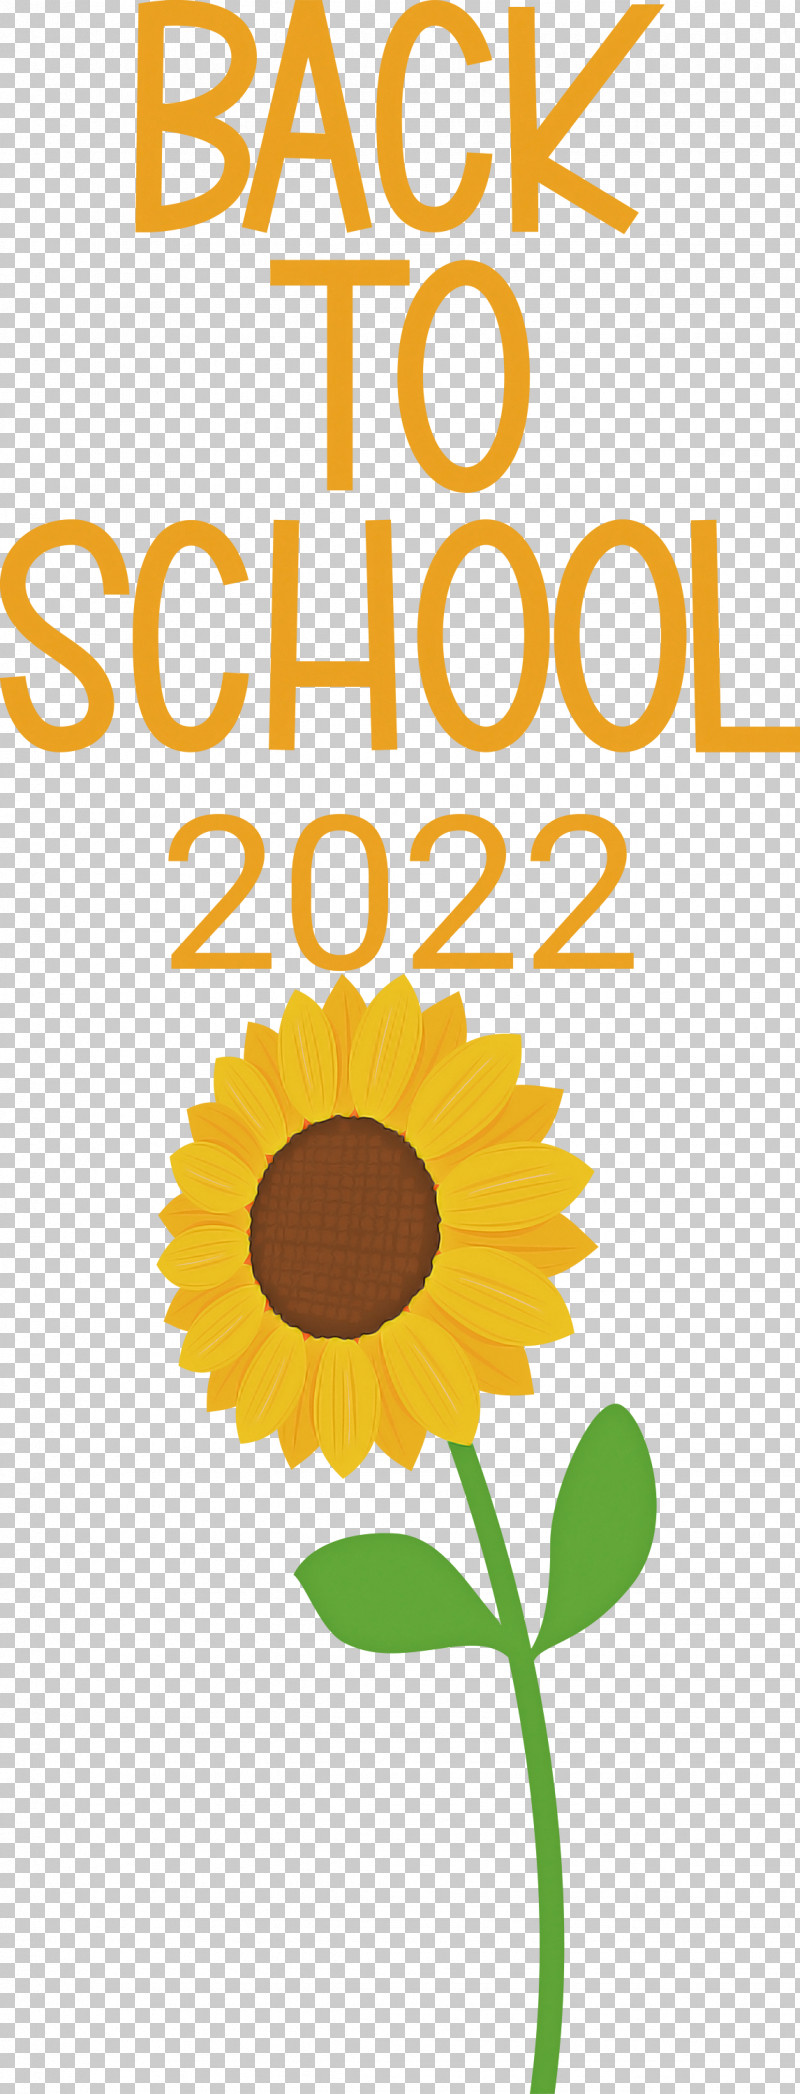 Back To School 2022 PNG, Clipart, Cut Flowers, Daisy Family, Floral Design, Flower, Happiness Free PNG Download